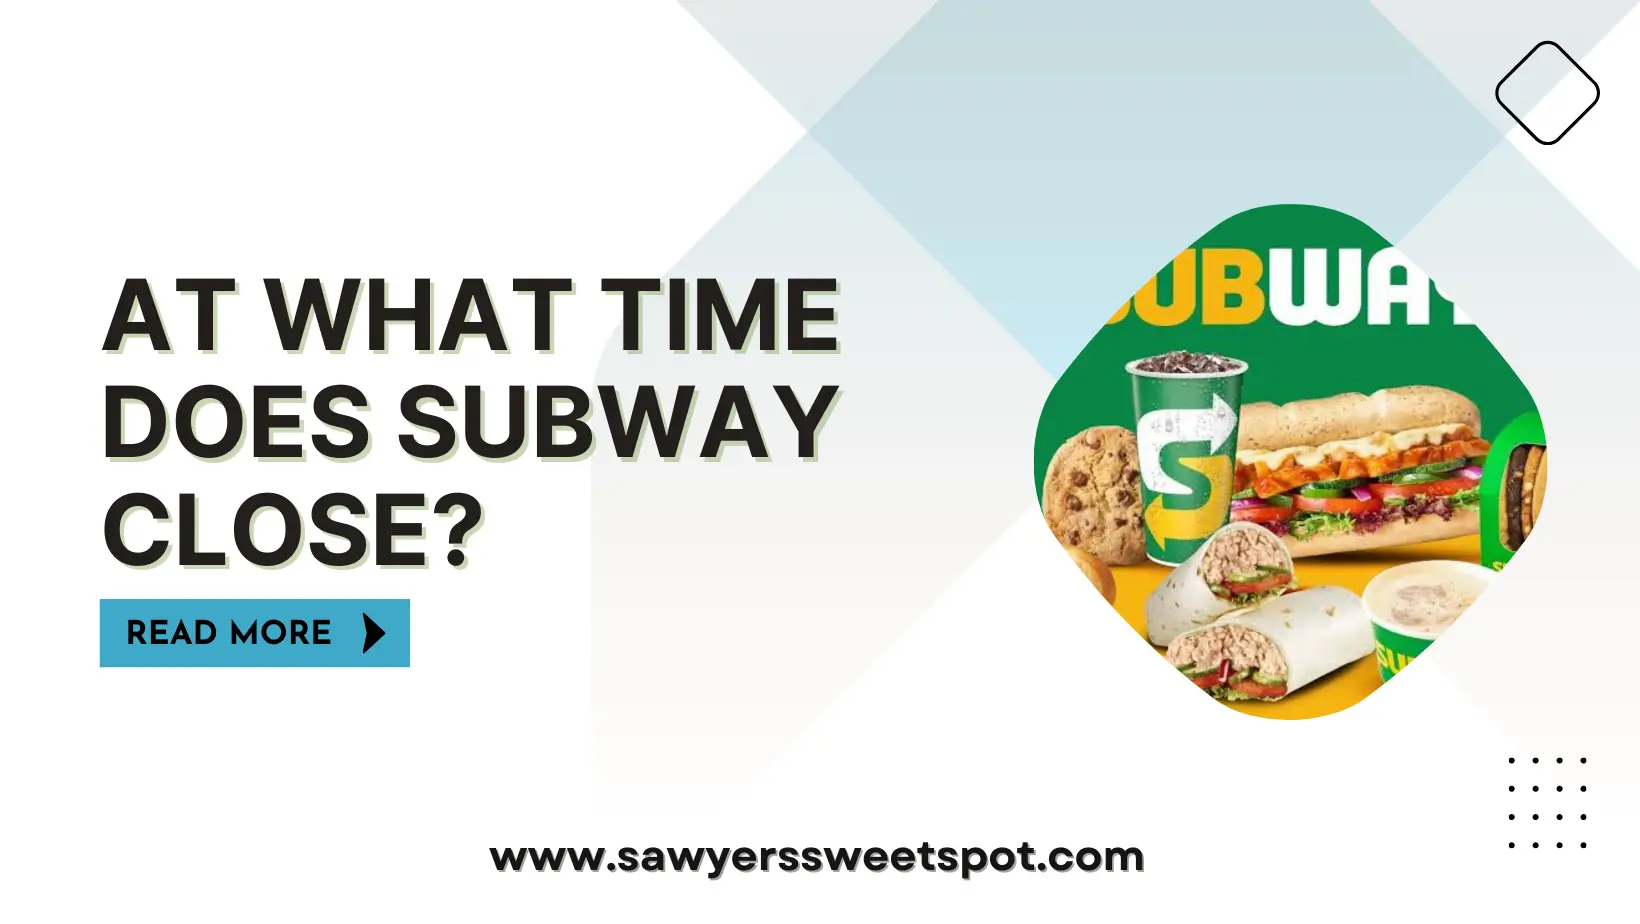 At What Time Does Subway Close?